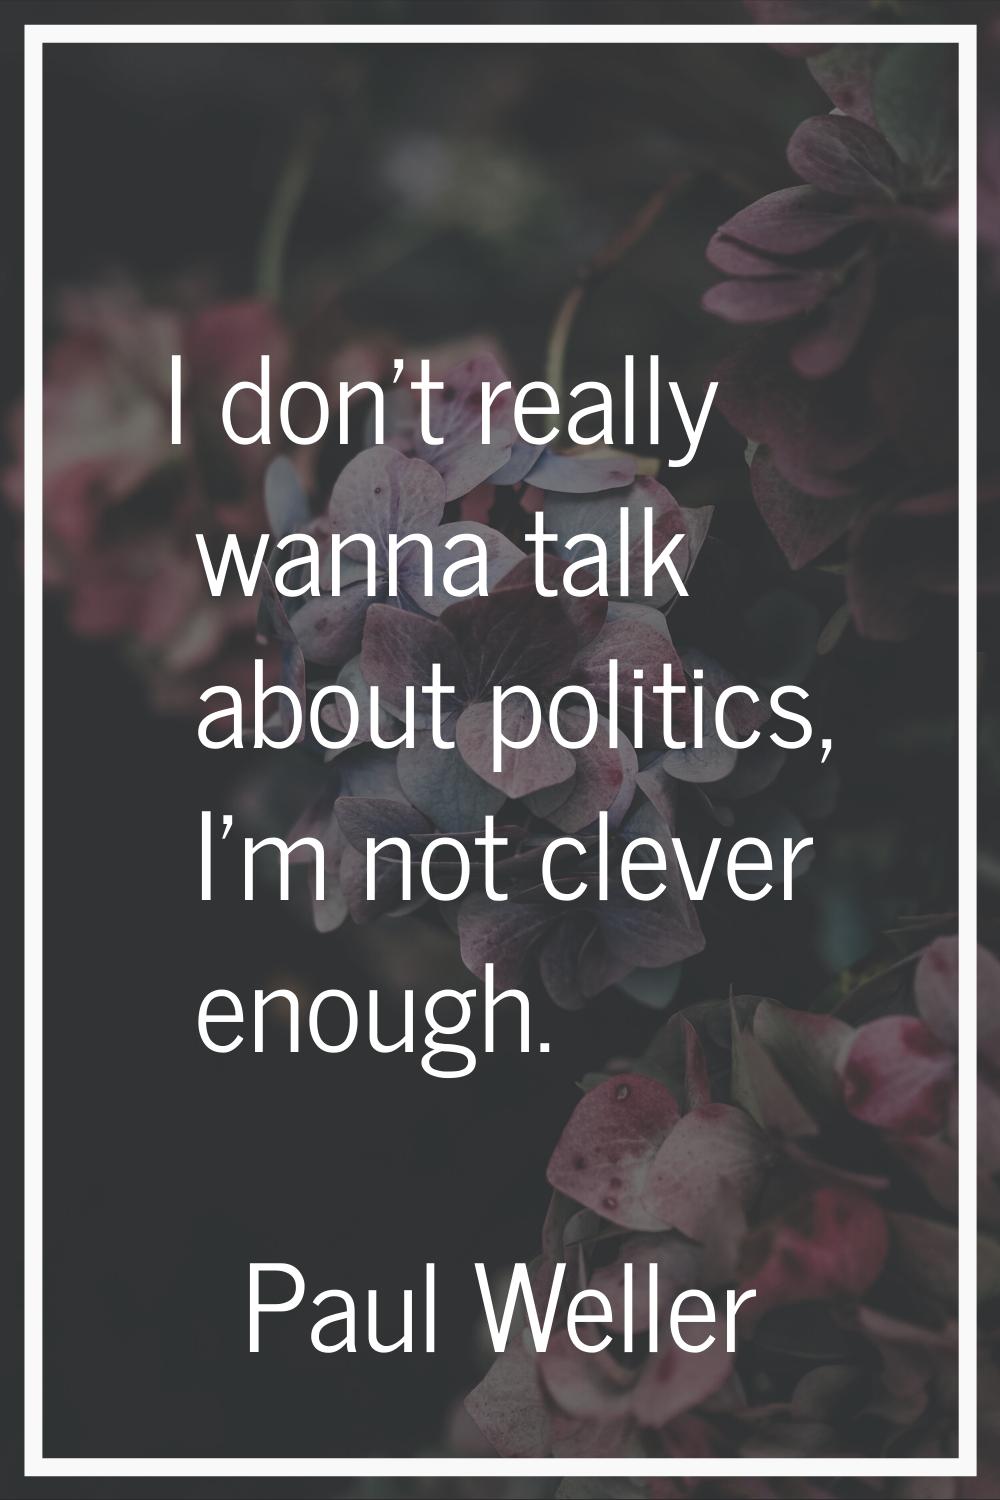 I don't really wanna talk about politics, I'm not clever enough.